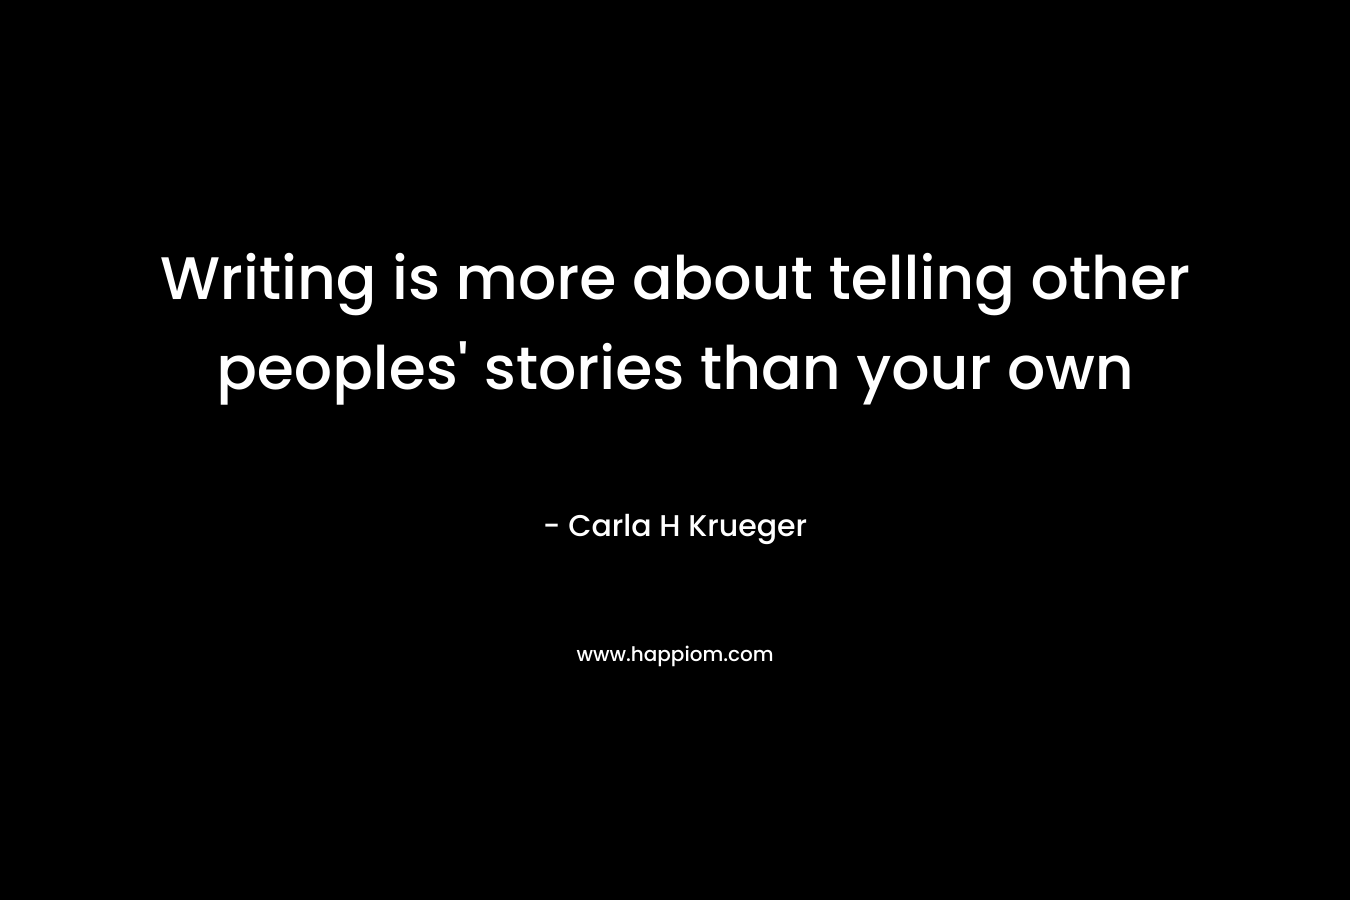 Writing is more about telling other peoples' stories than your own